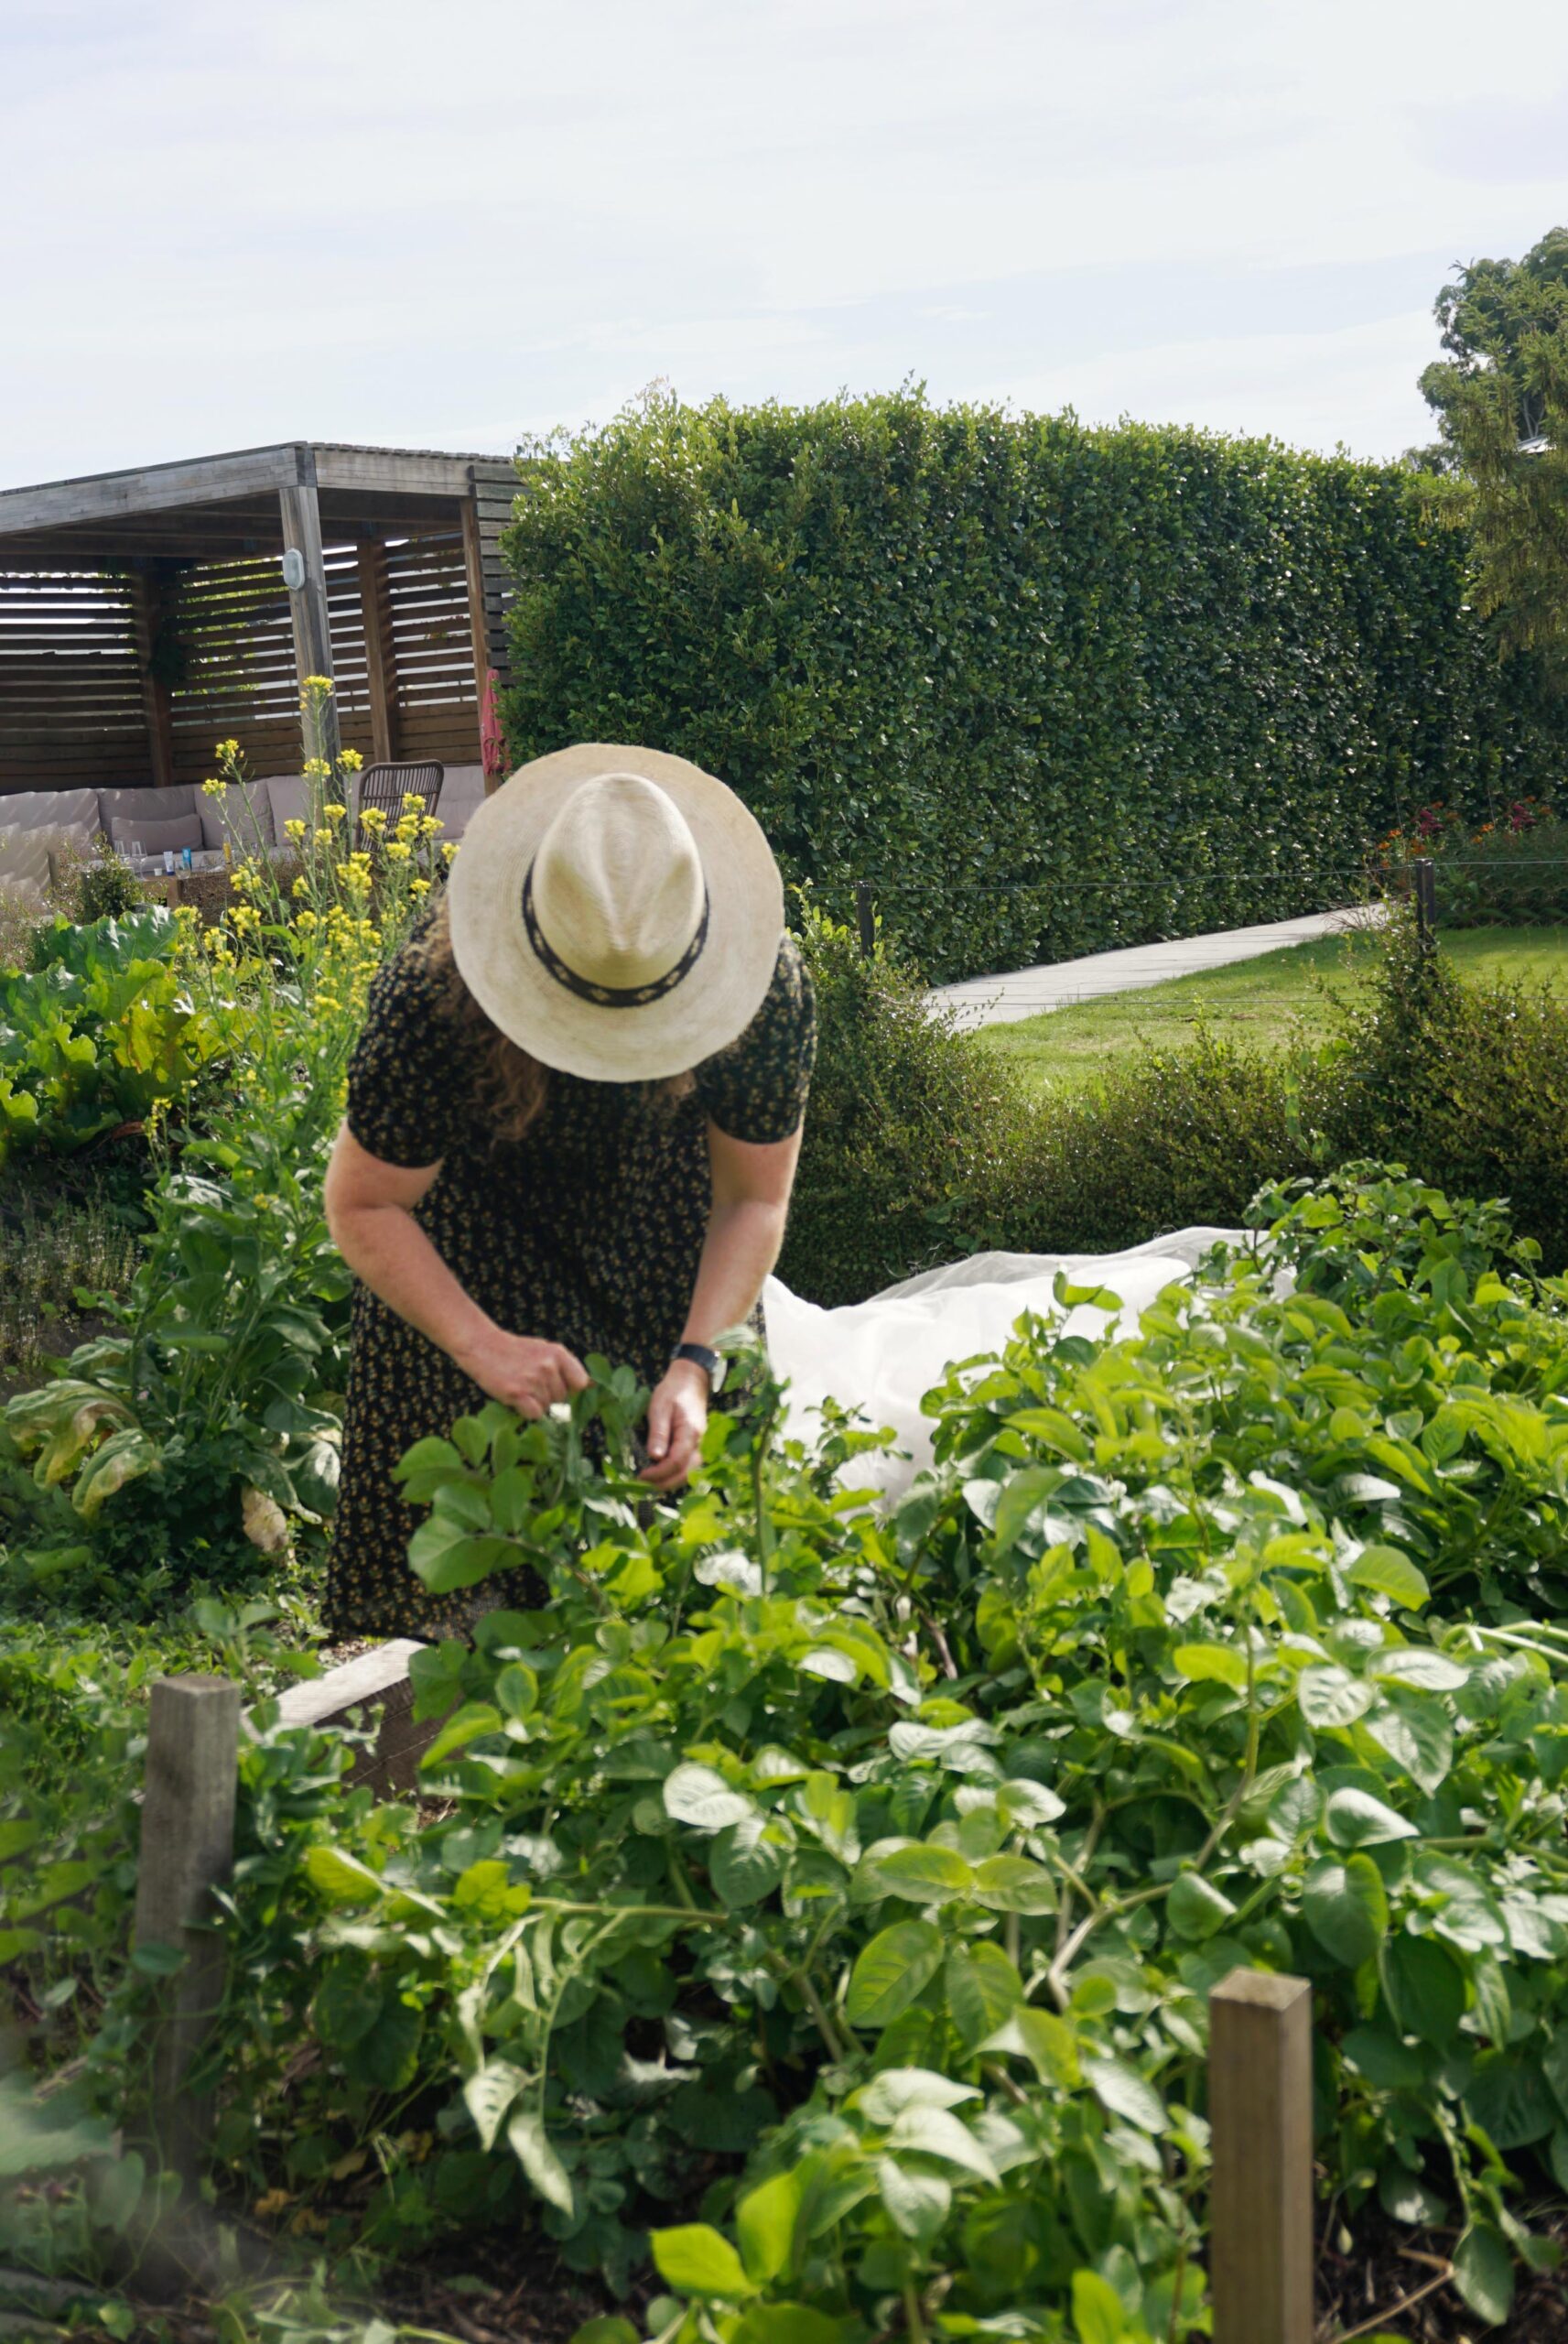 A woman in a wide-brimmed hat tends to plants.